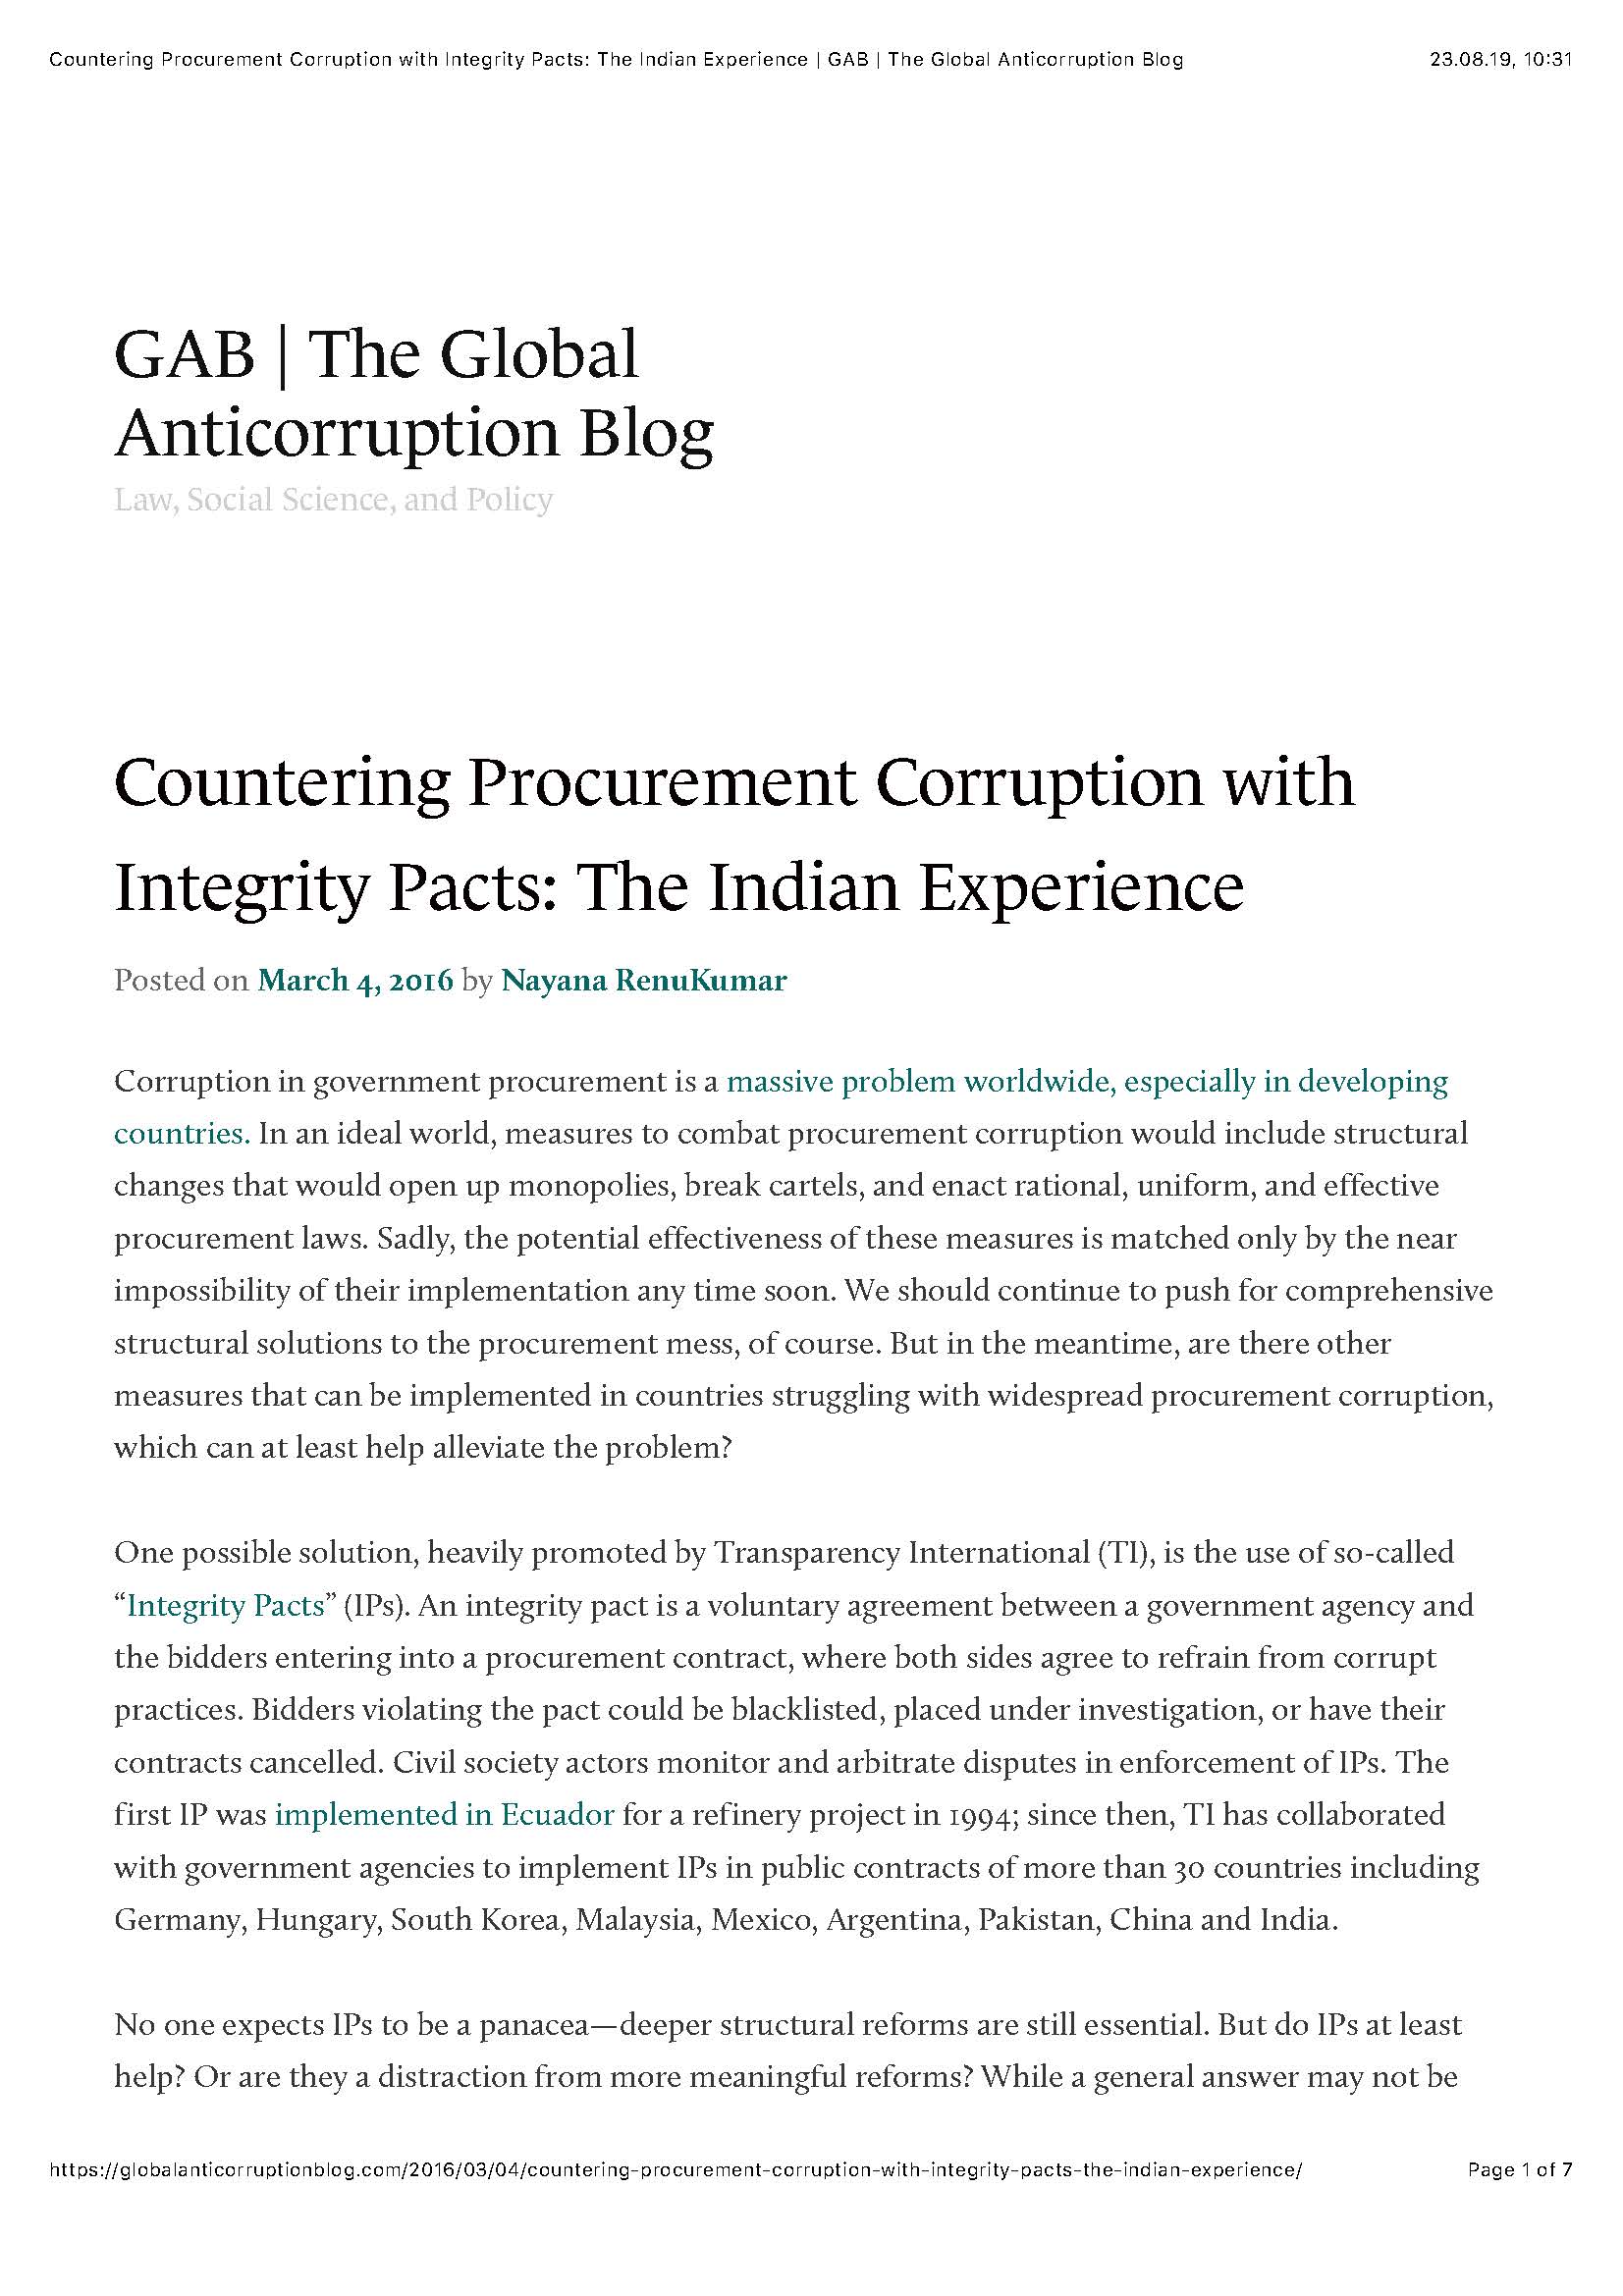 Pages from GAB_Countering Procurement Corruption with Integrity Pacts The Indian Experience_2016.jpg